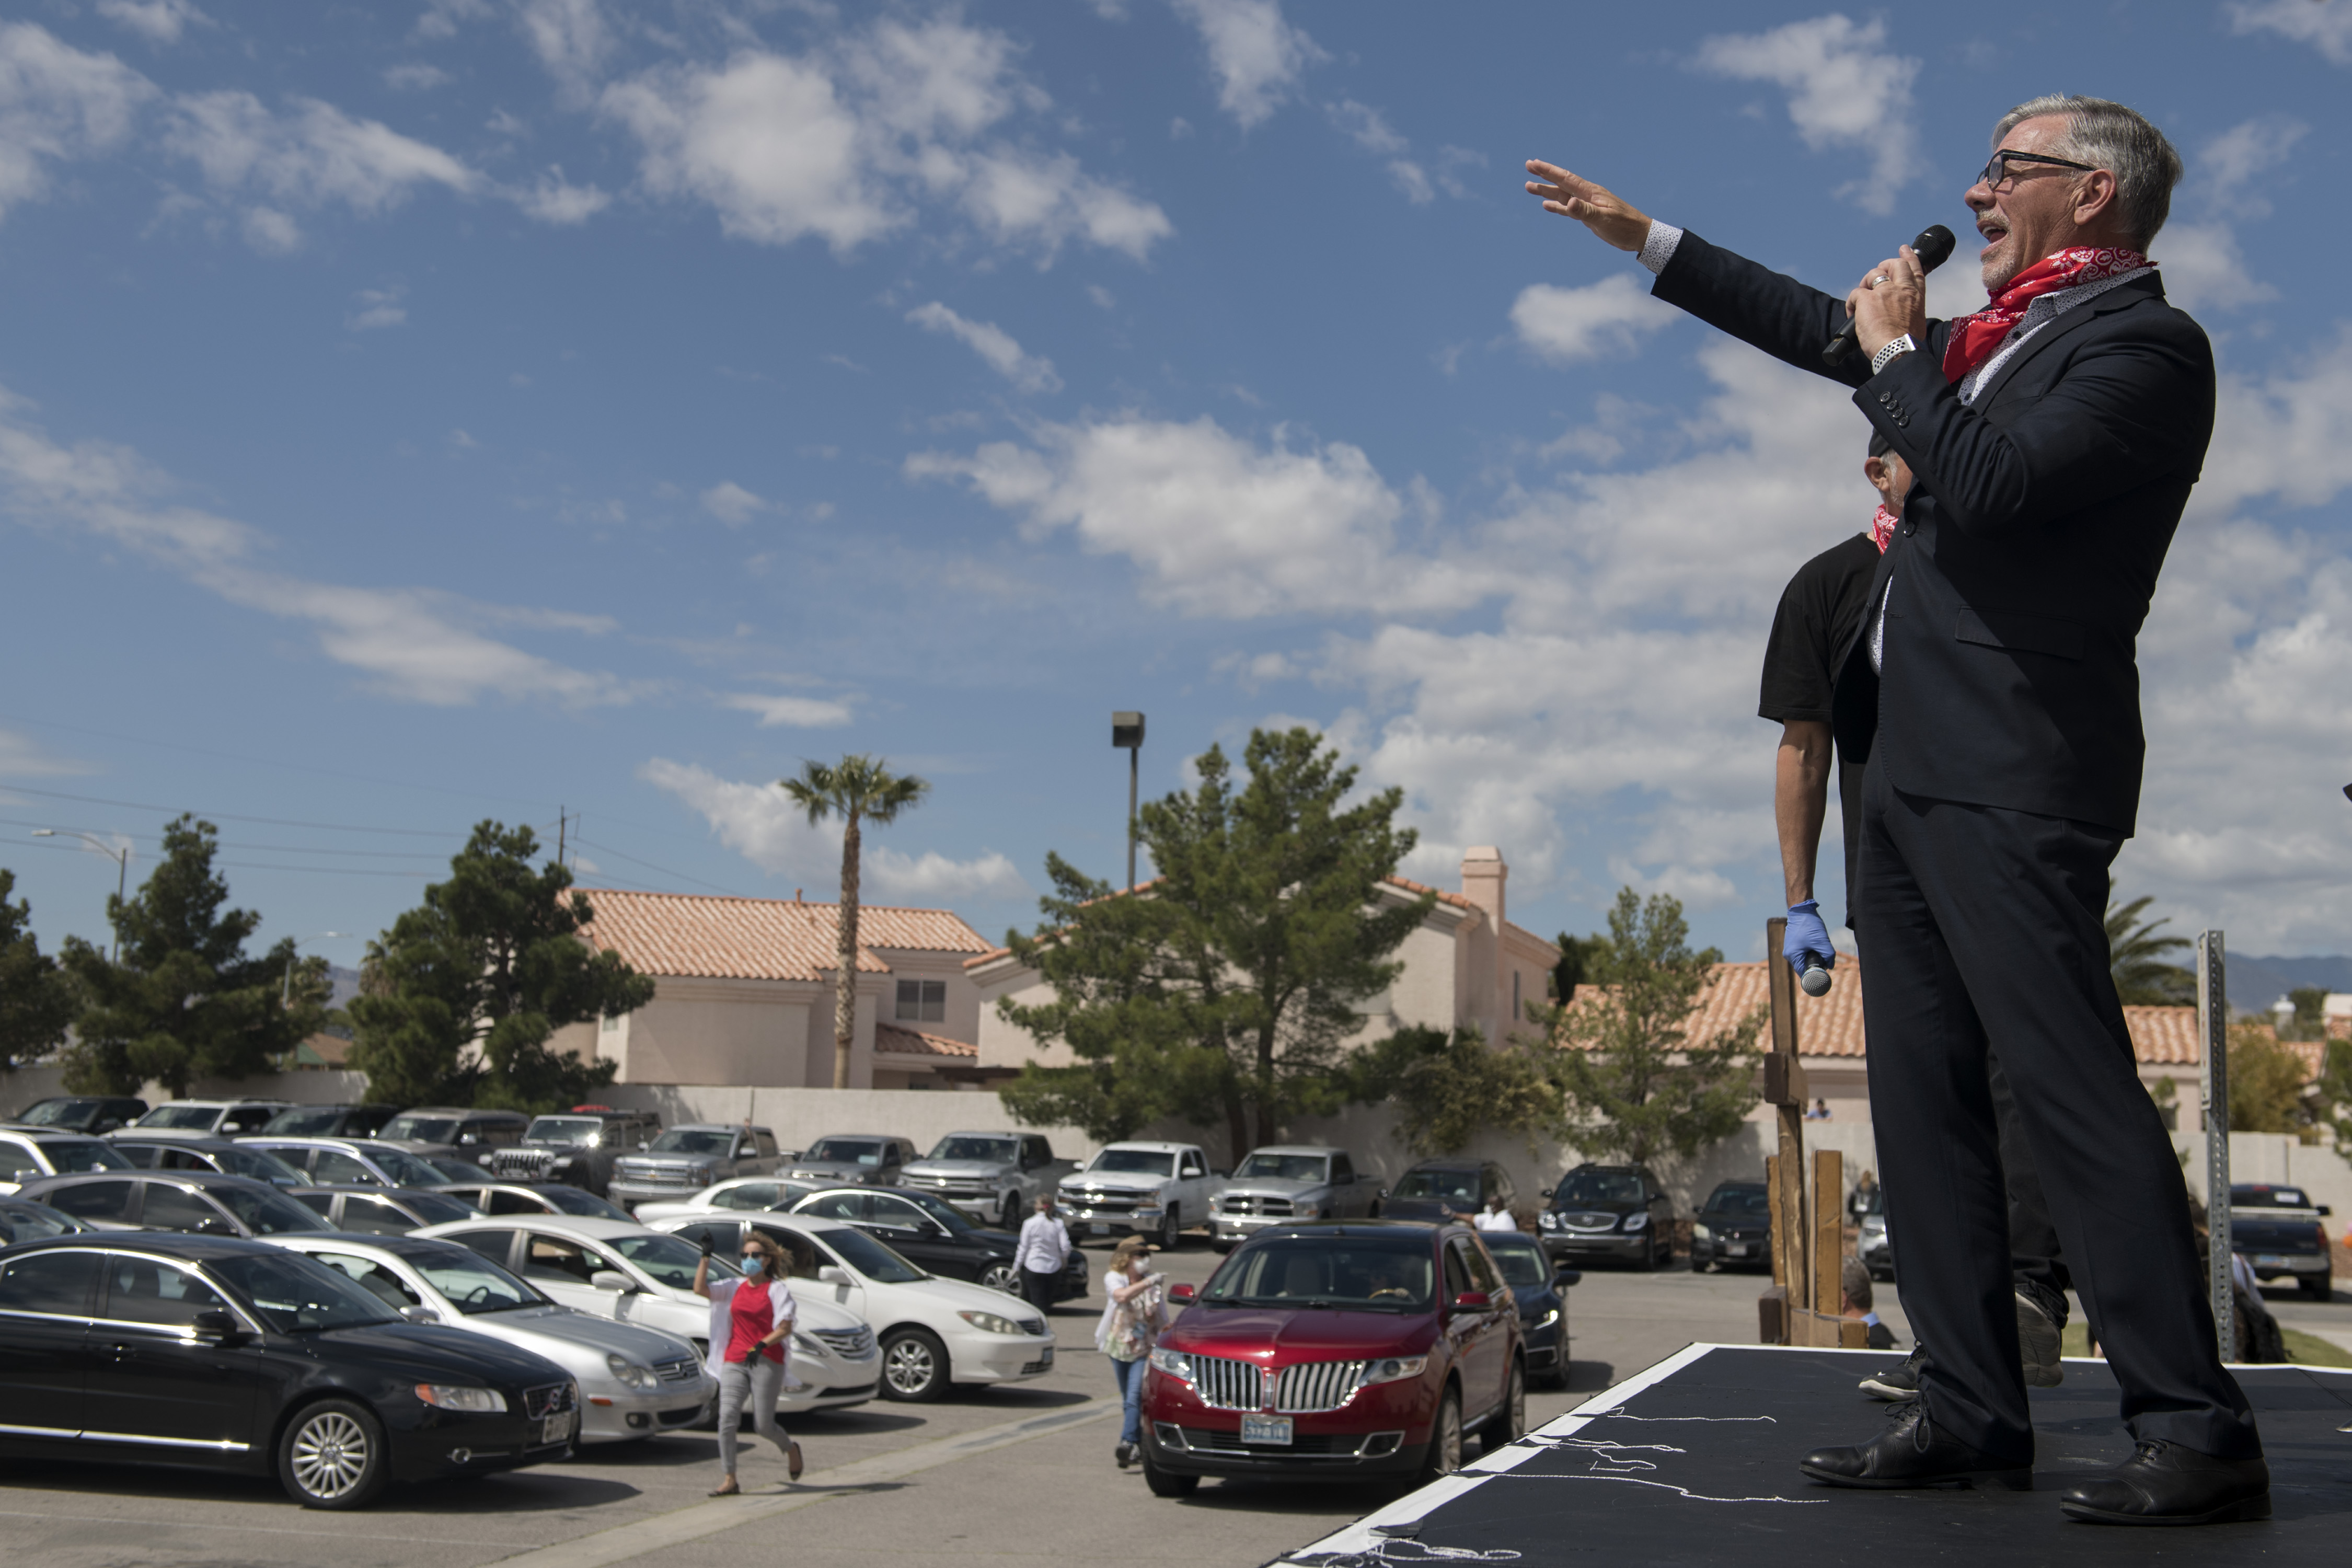 Pastor Paul Goulet leads a drive-in Easter service amid the Coronavirus pandemic at the International Church of Las Vegas in Las Vegas, Nevada on Sunday, April 12, 2020. - (Photo by BRIDGET BENNETT/AFP via Getty Images)